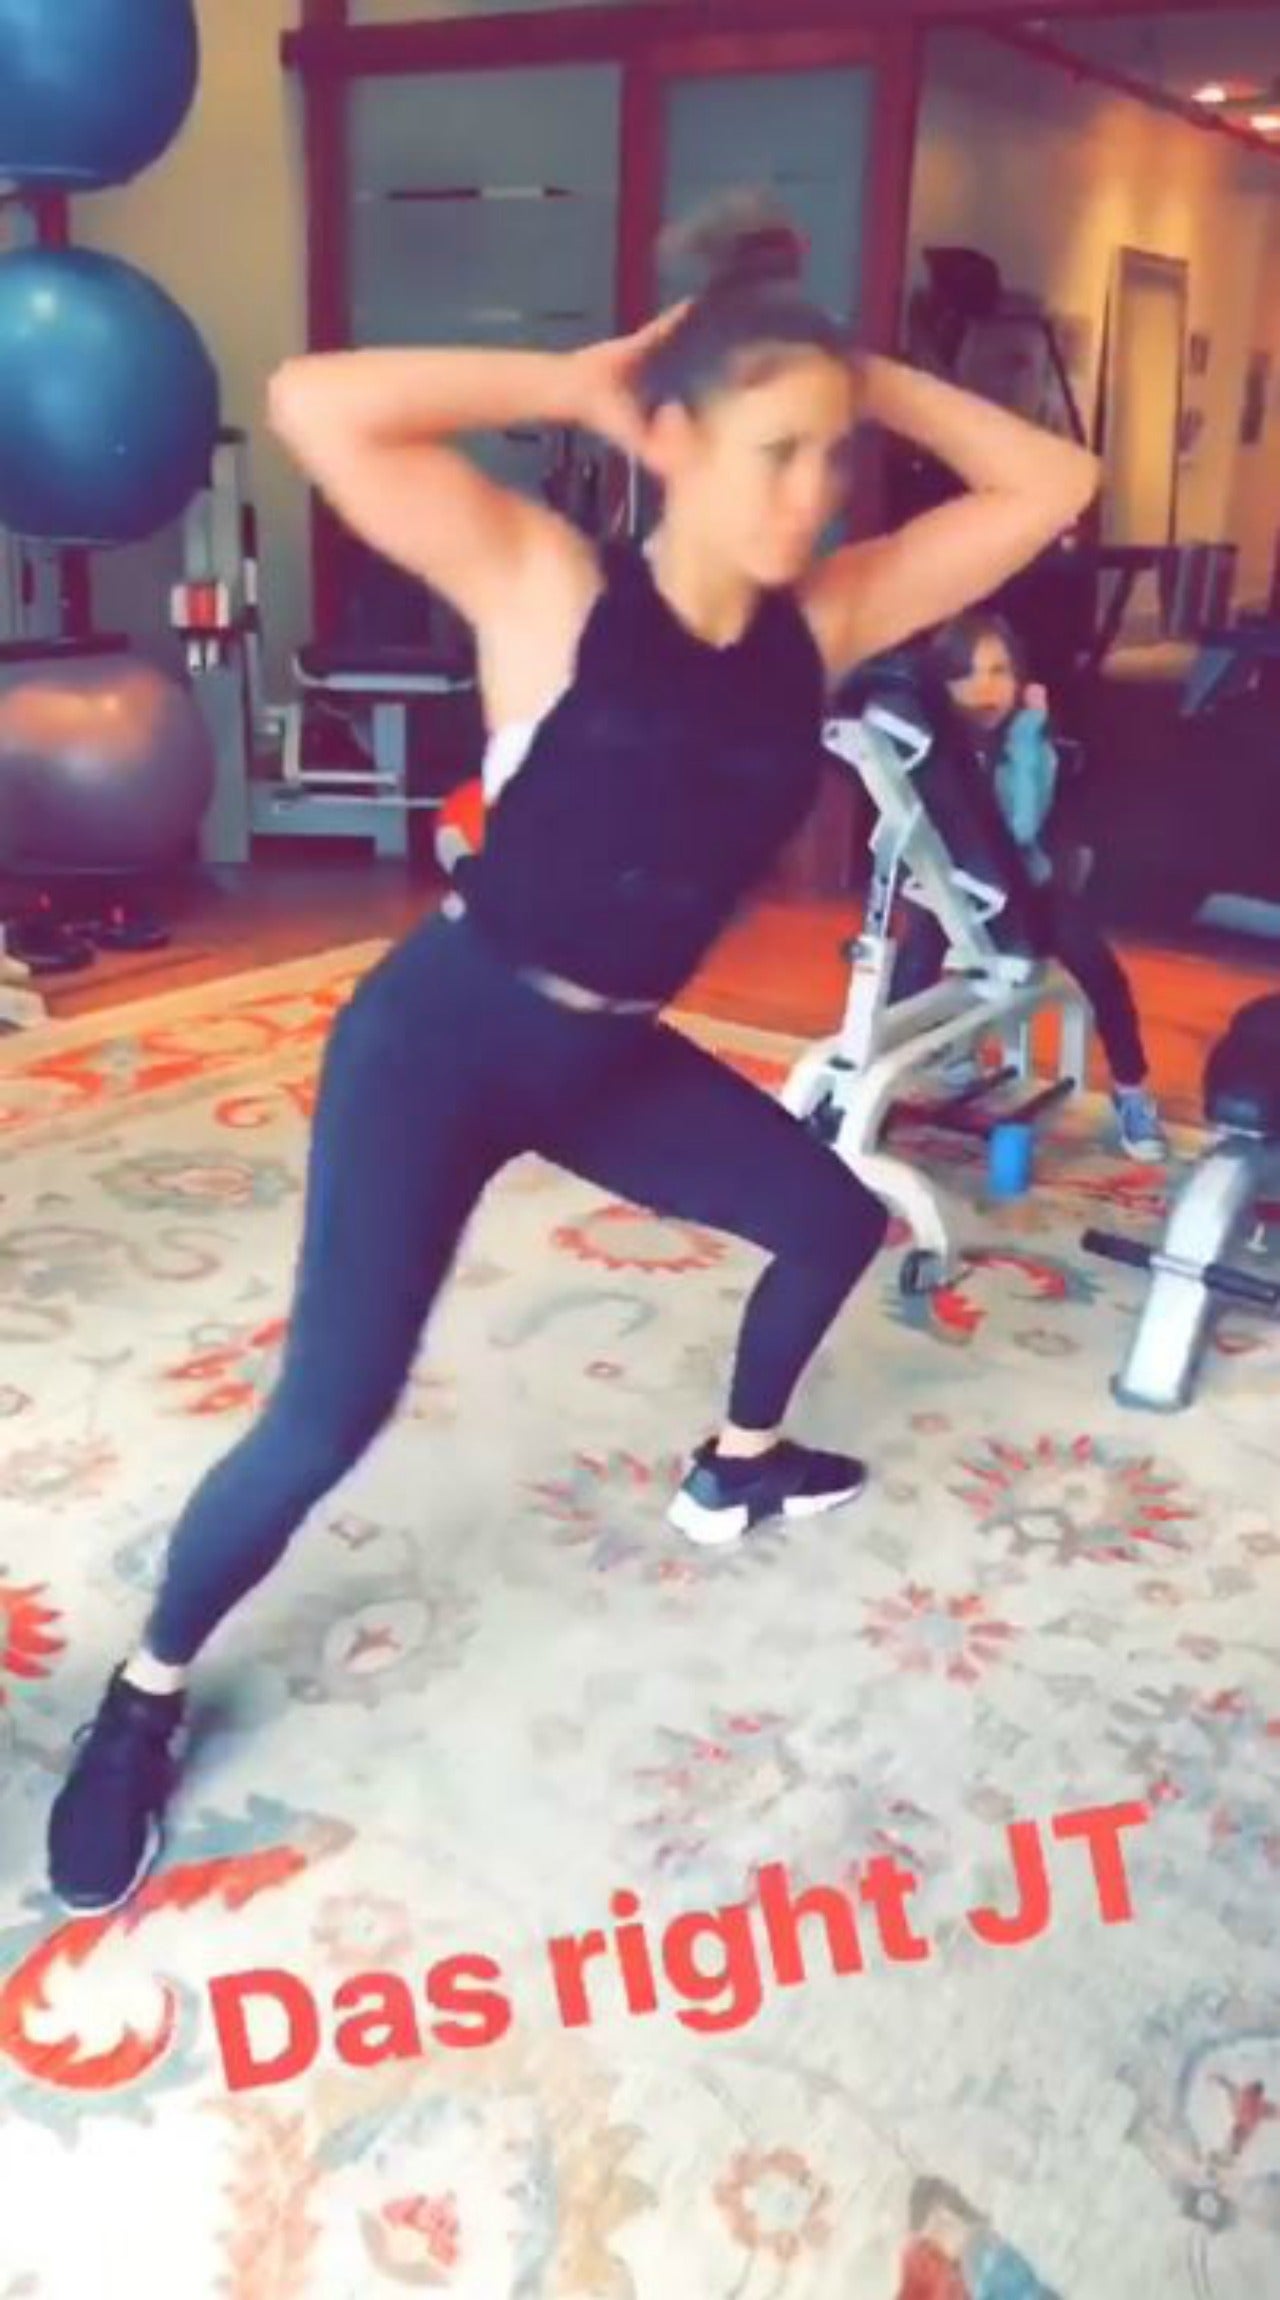 Jennifer Lopez Shows Off Her Workout Routine on Instagram | Entertainment Tonight